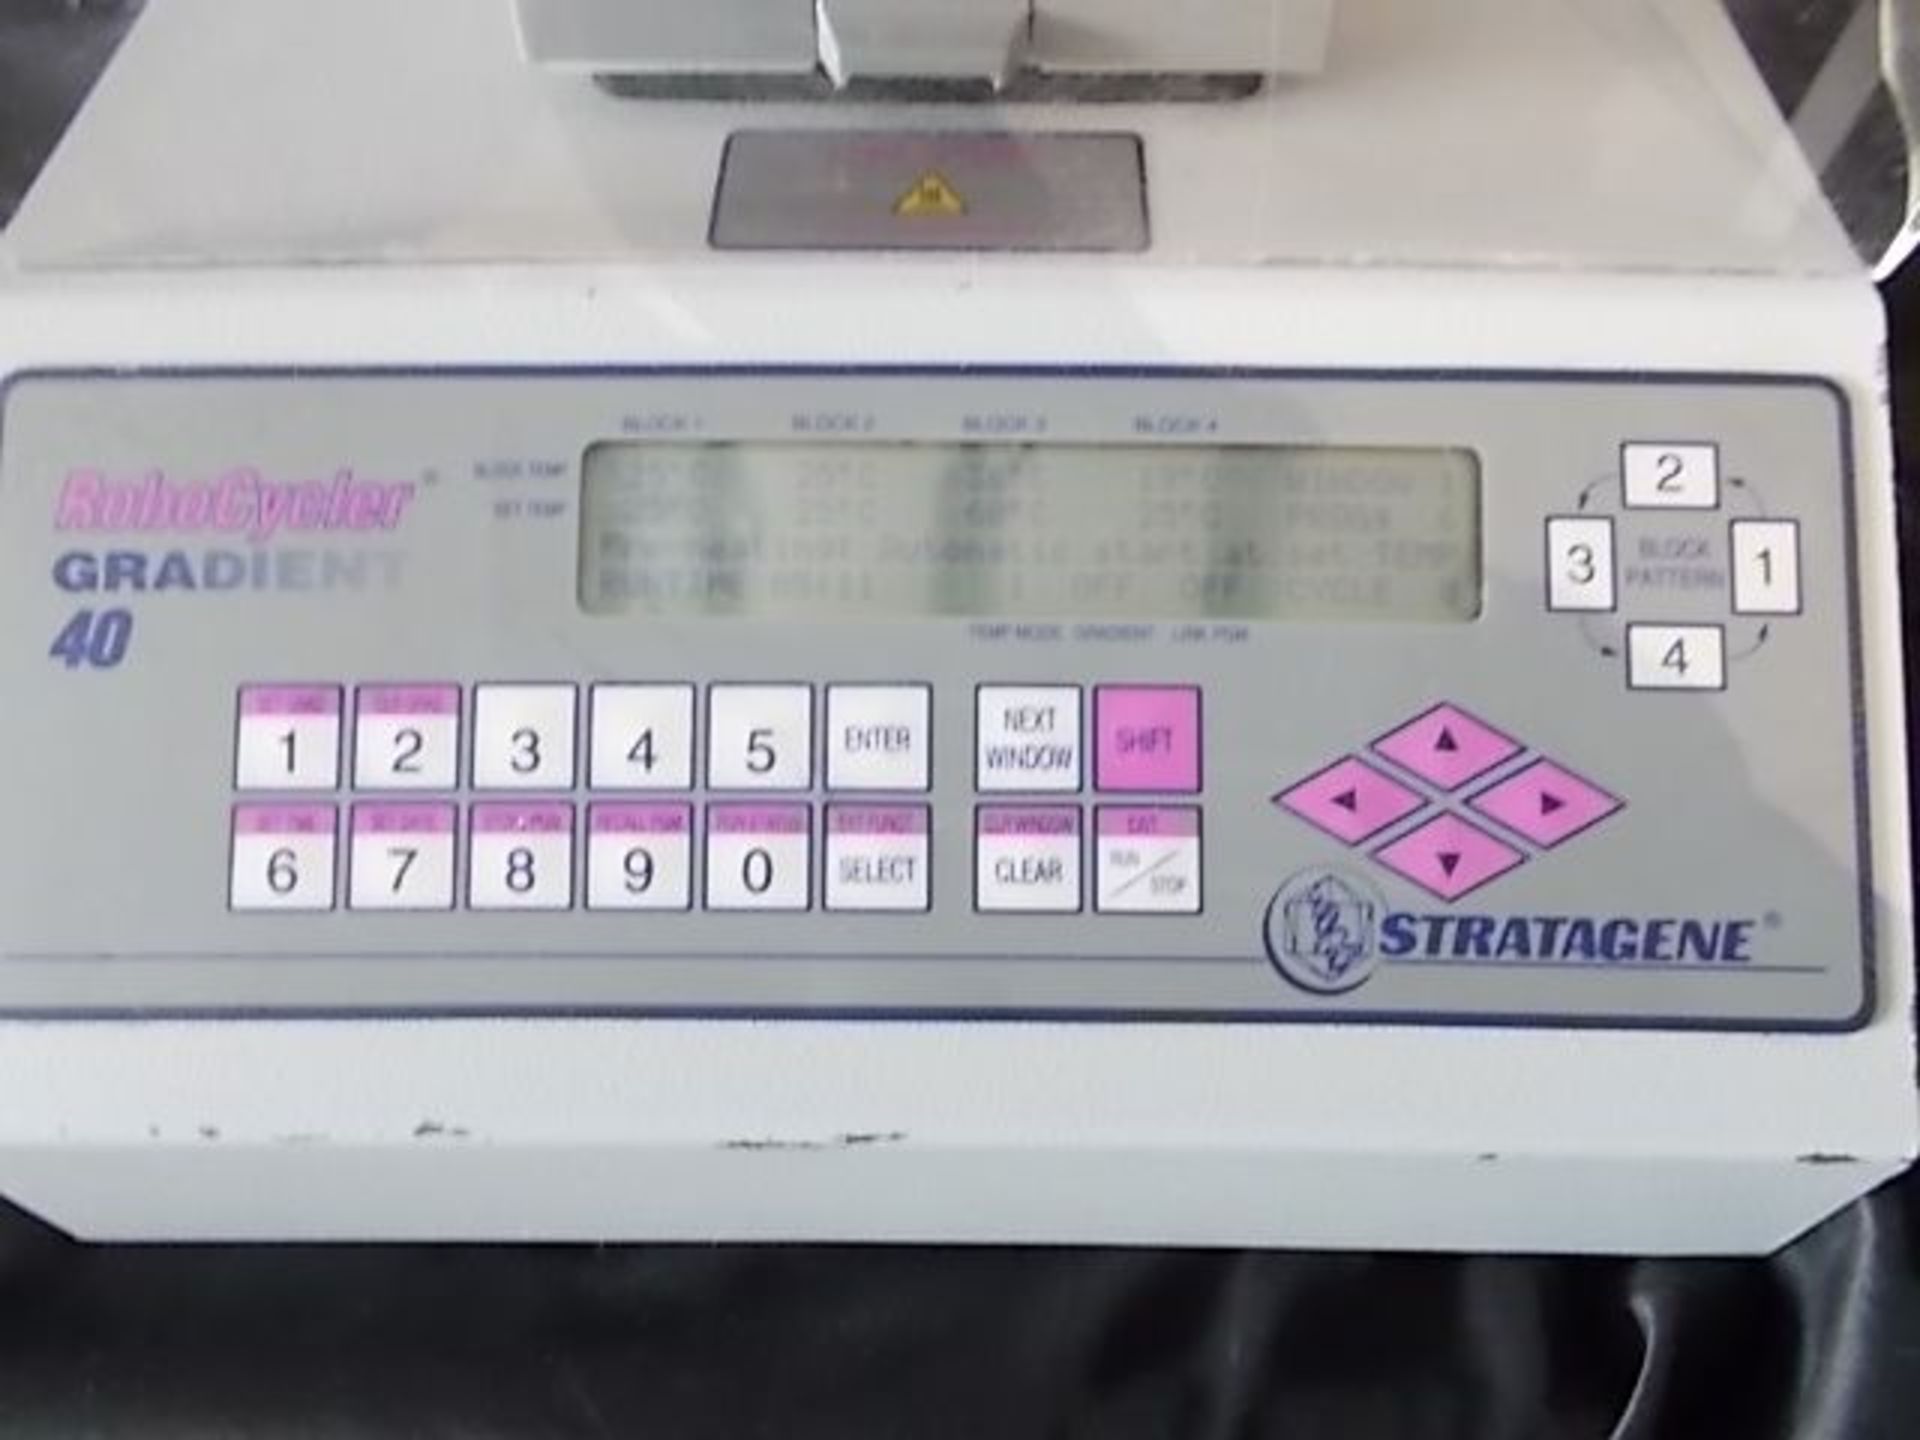 Stratagene Robocycler Gradient 40 Thermal Cycler PCR DNA With Hot Top, Qty 1, 330883751805 - Image 2 of 12